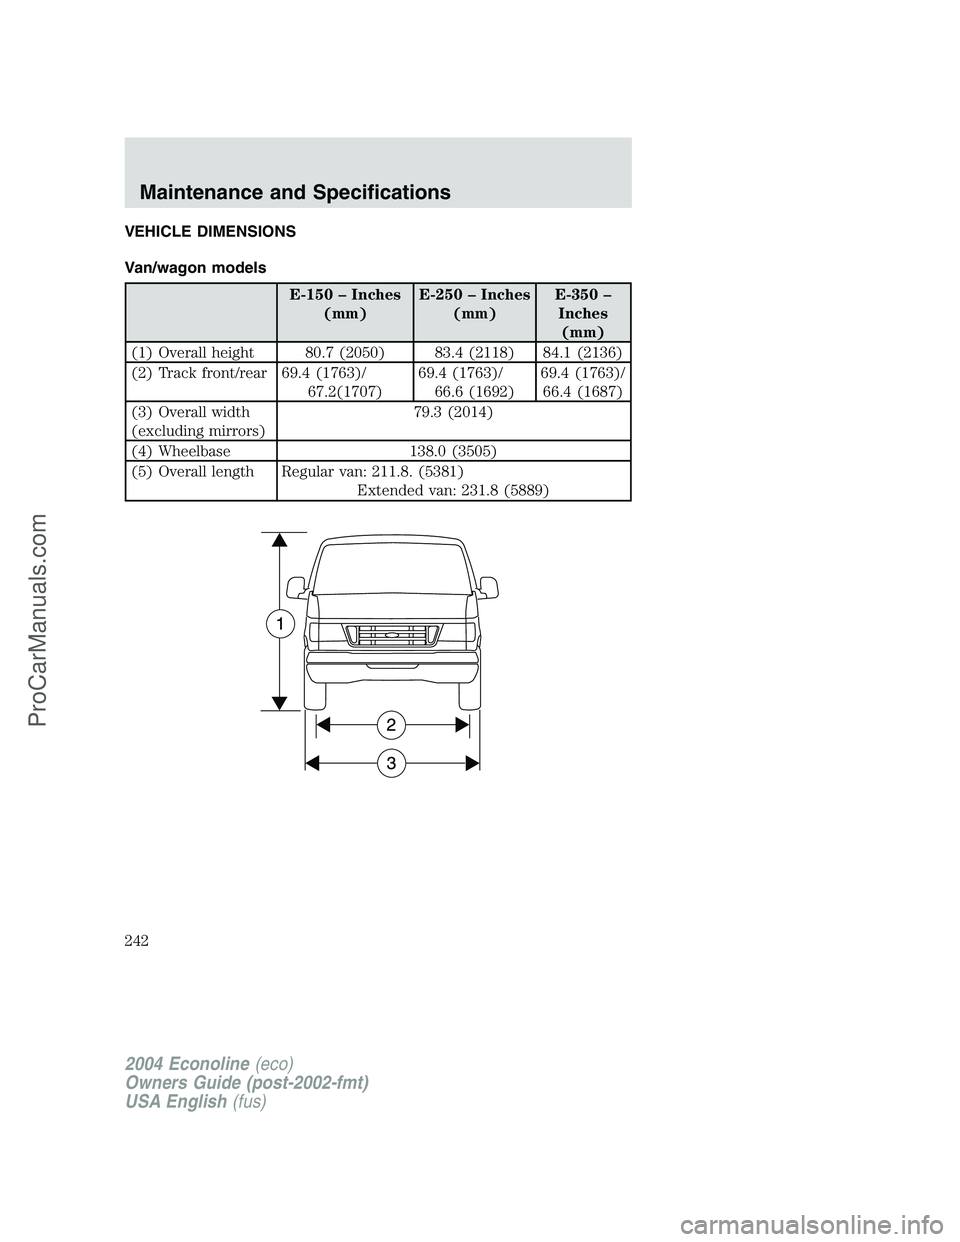 FORD E-150 2004  Owners Manual VEHICLE DIMENSIONS
Van/wagon models
E-150–Inches
(mm)E-250–Inches
(mm)E-350–
Inches
(mm)
(1) Overall height 80.7 (2050) 83.4 (2118) 84.1 (2136)
(2) Track front/rear 69.4 (1763)/
67.2(1707)69.4 (